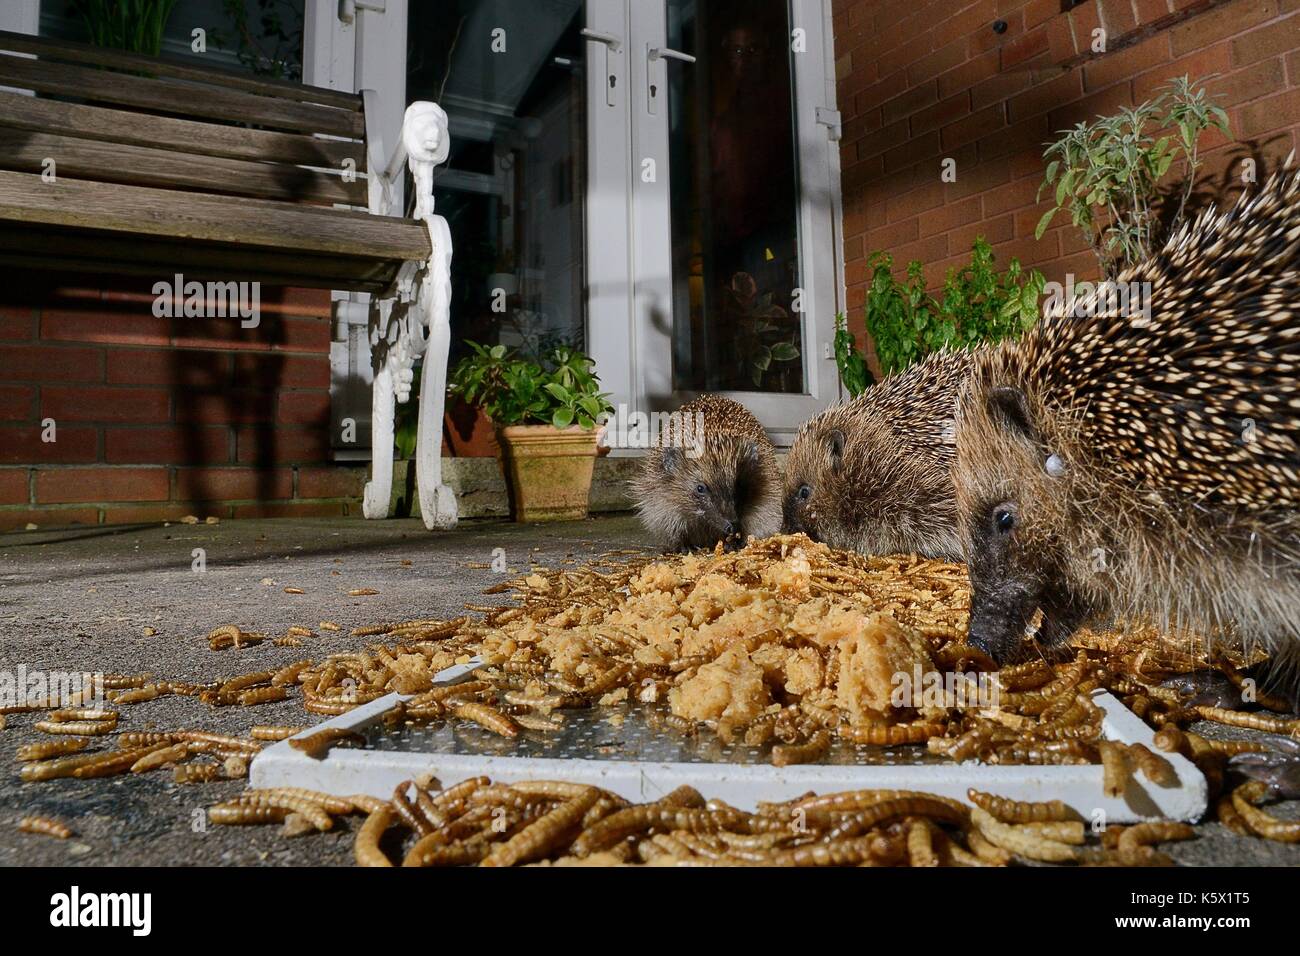 Three Hedgehogs (Erinaceus europaeus) feeding on mealworms and oatmeal left out for them on a patio, Chippenham, Wiltshire, UK, August.  Taken with a  Stock Photo